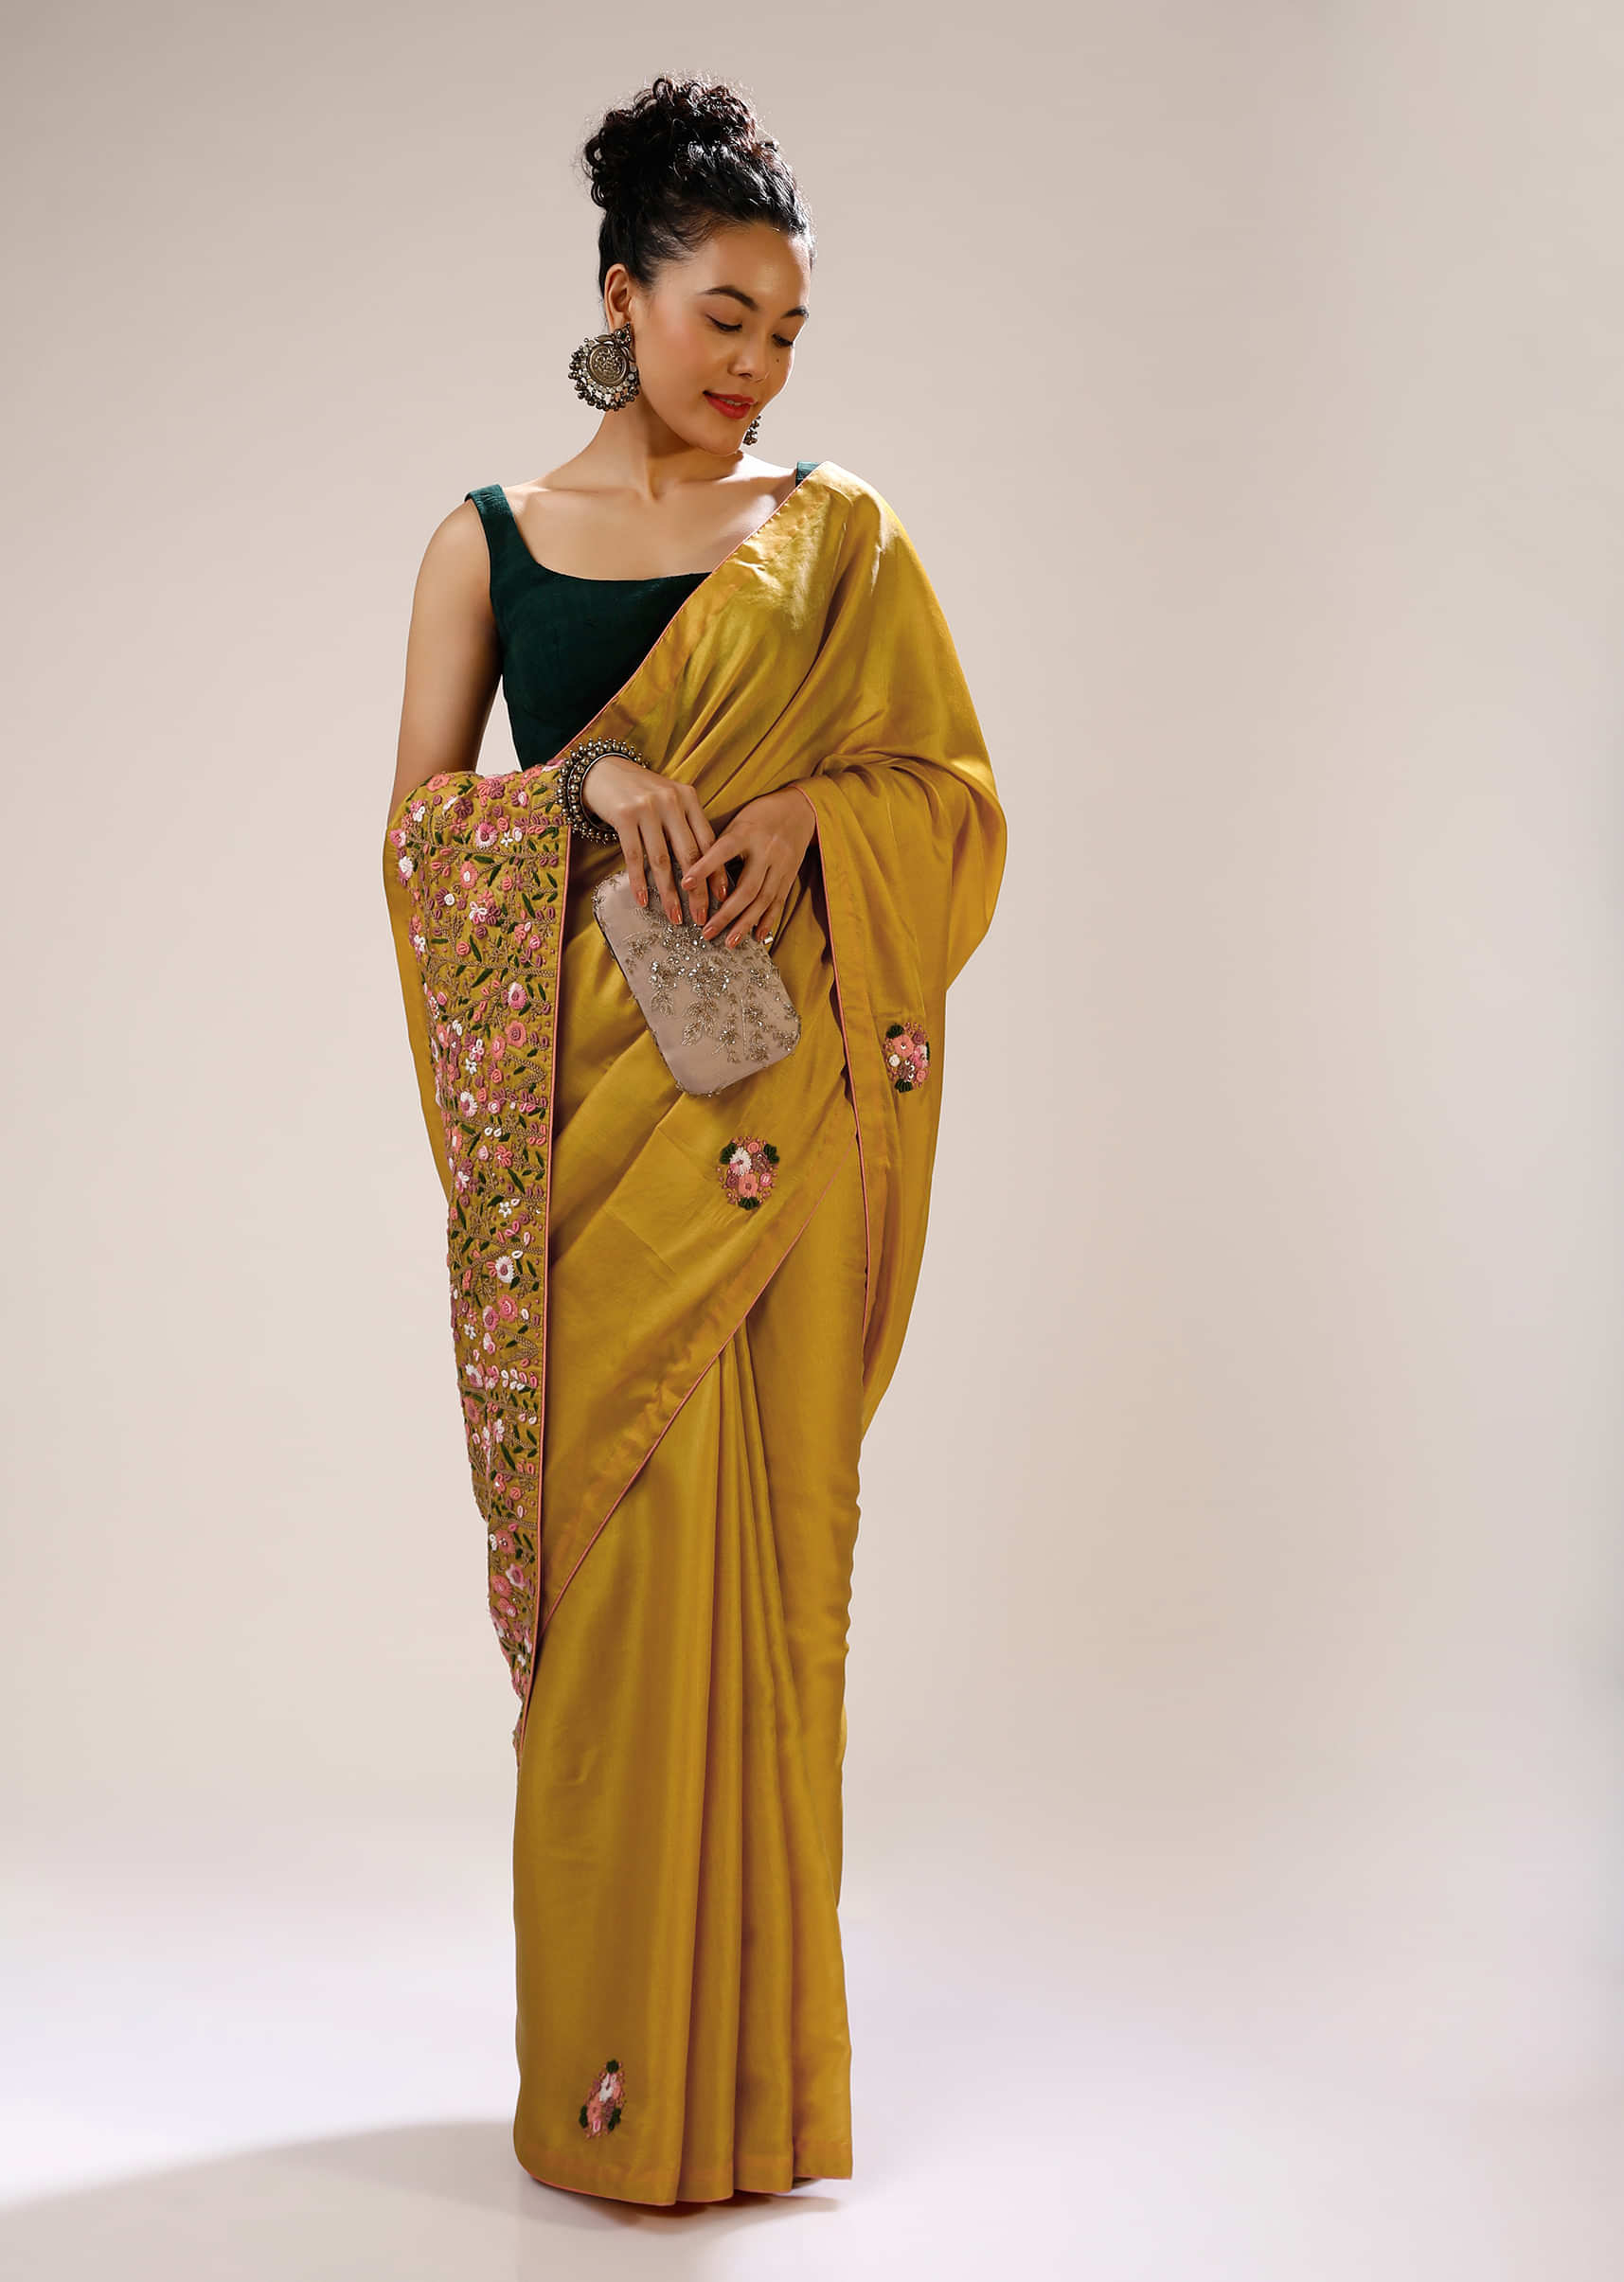 Honey Gold Saree In Dupion Silk With Multi Colored Bud Embroidered Floral Buttis And Heavy Pallu Design  